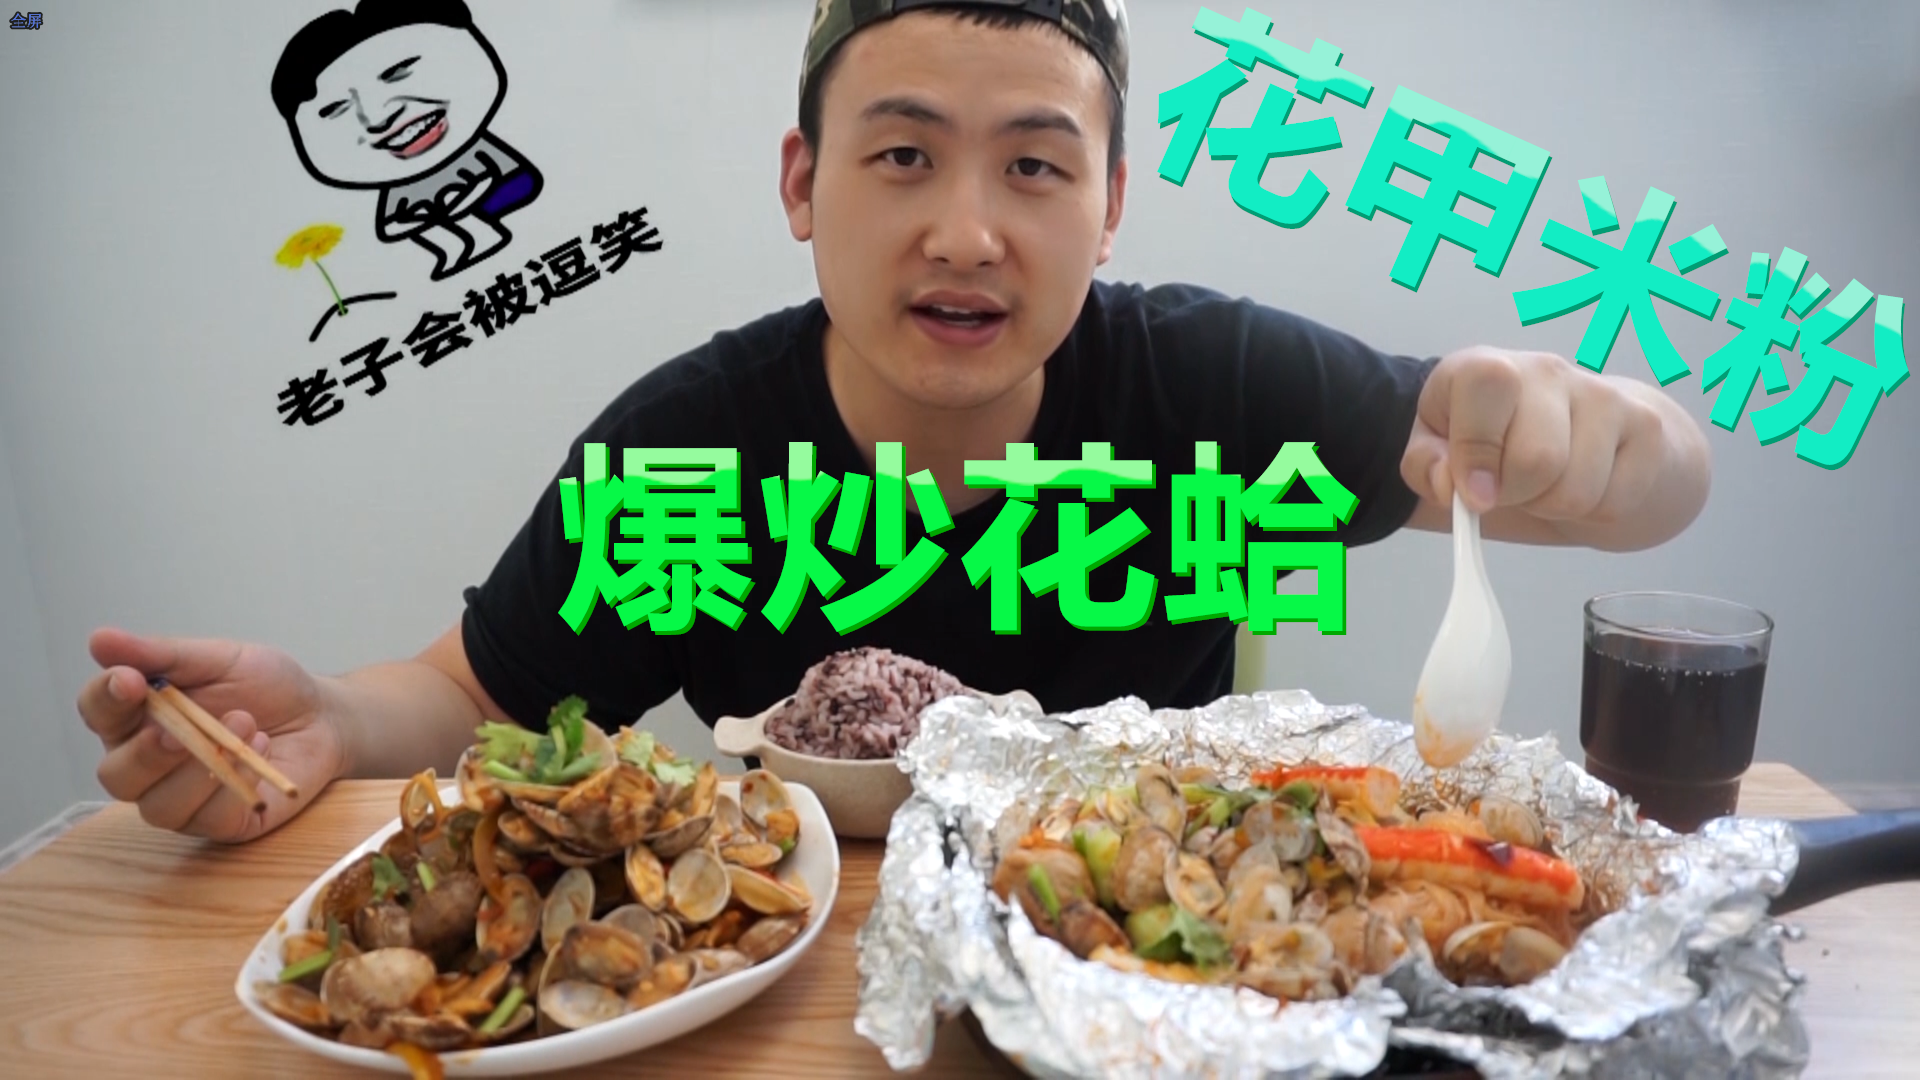 The young man tried to cook delicious food and it was also delicious. The fried clam was served with black rice.